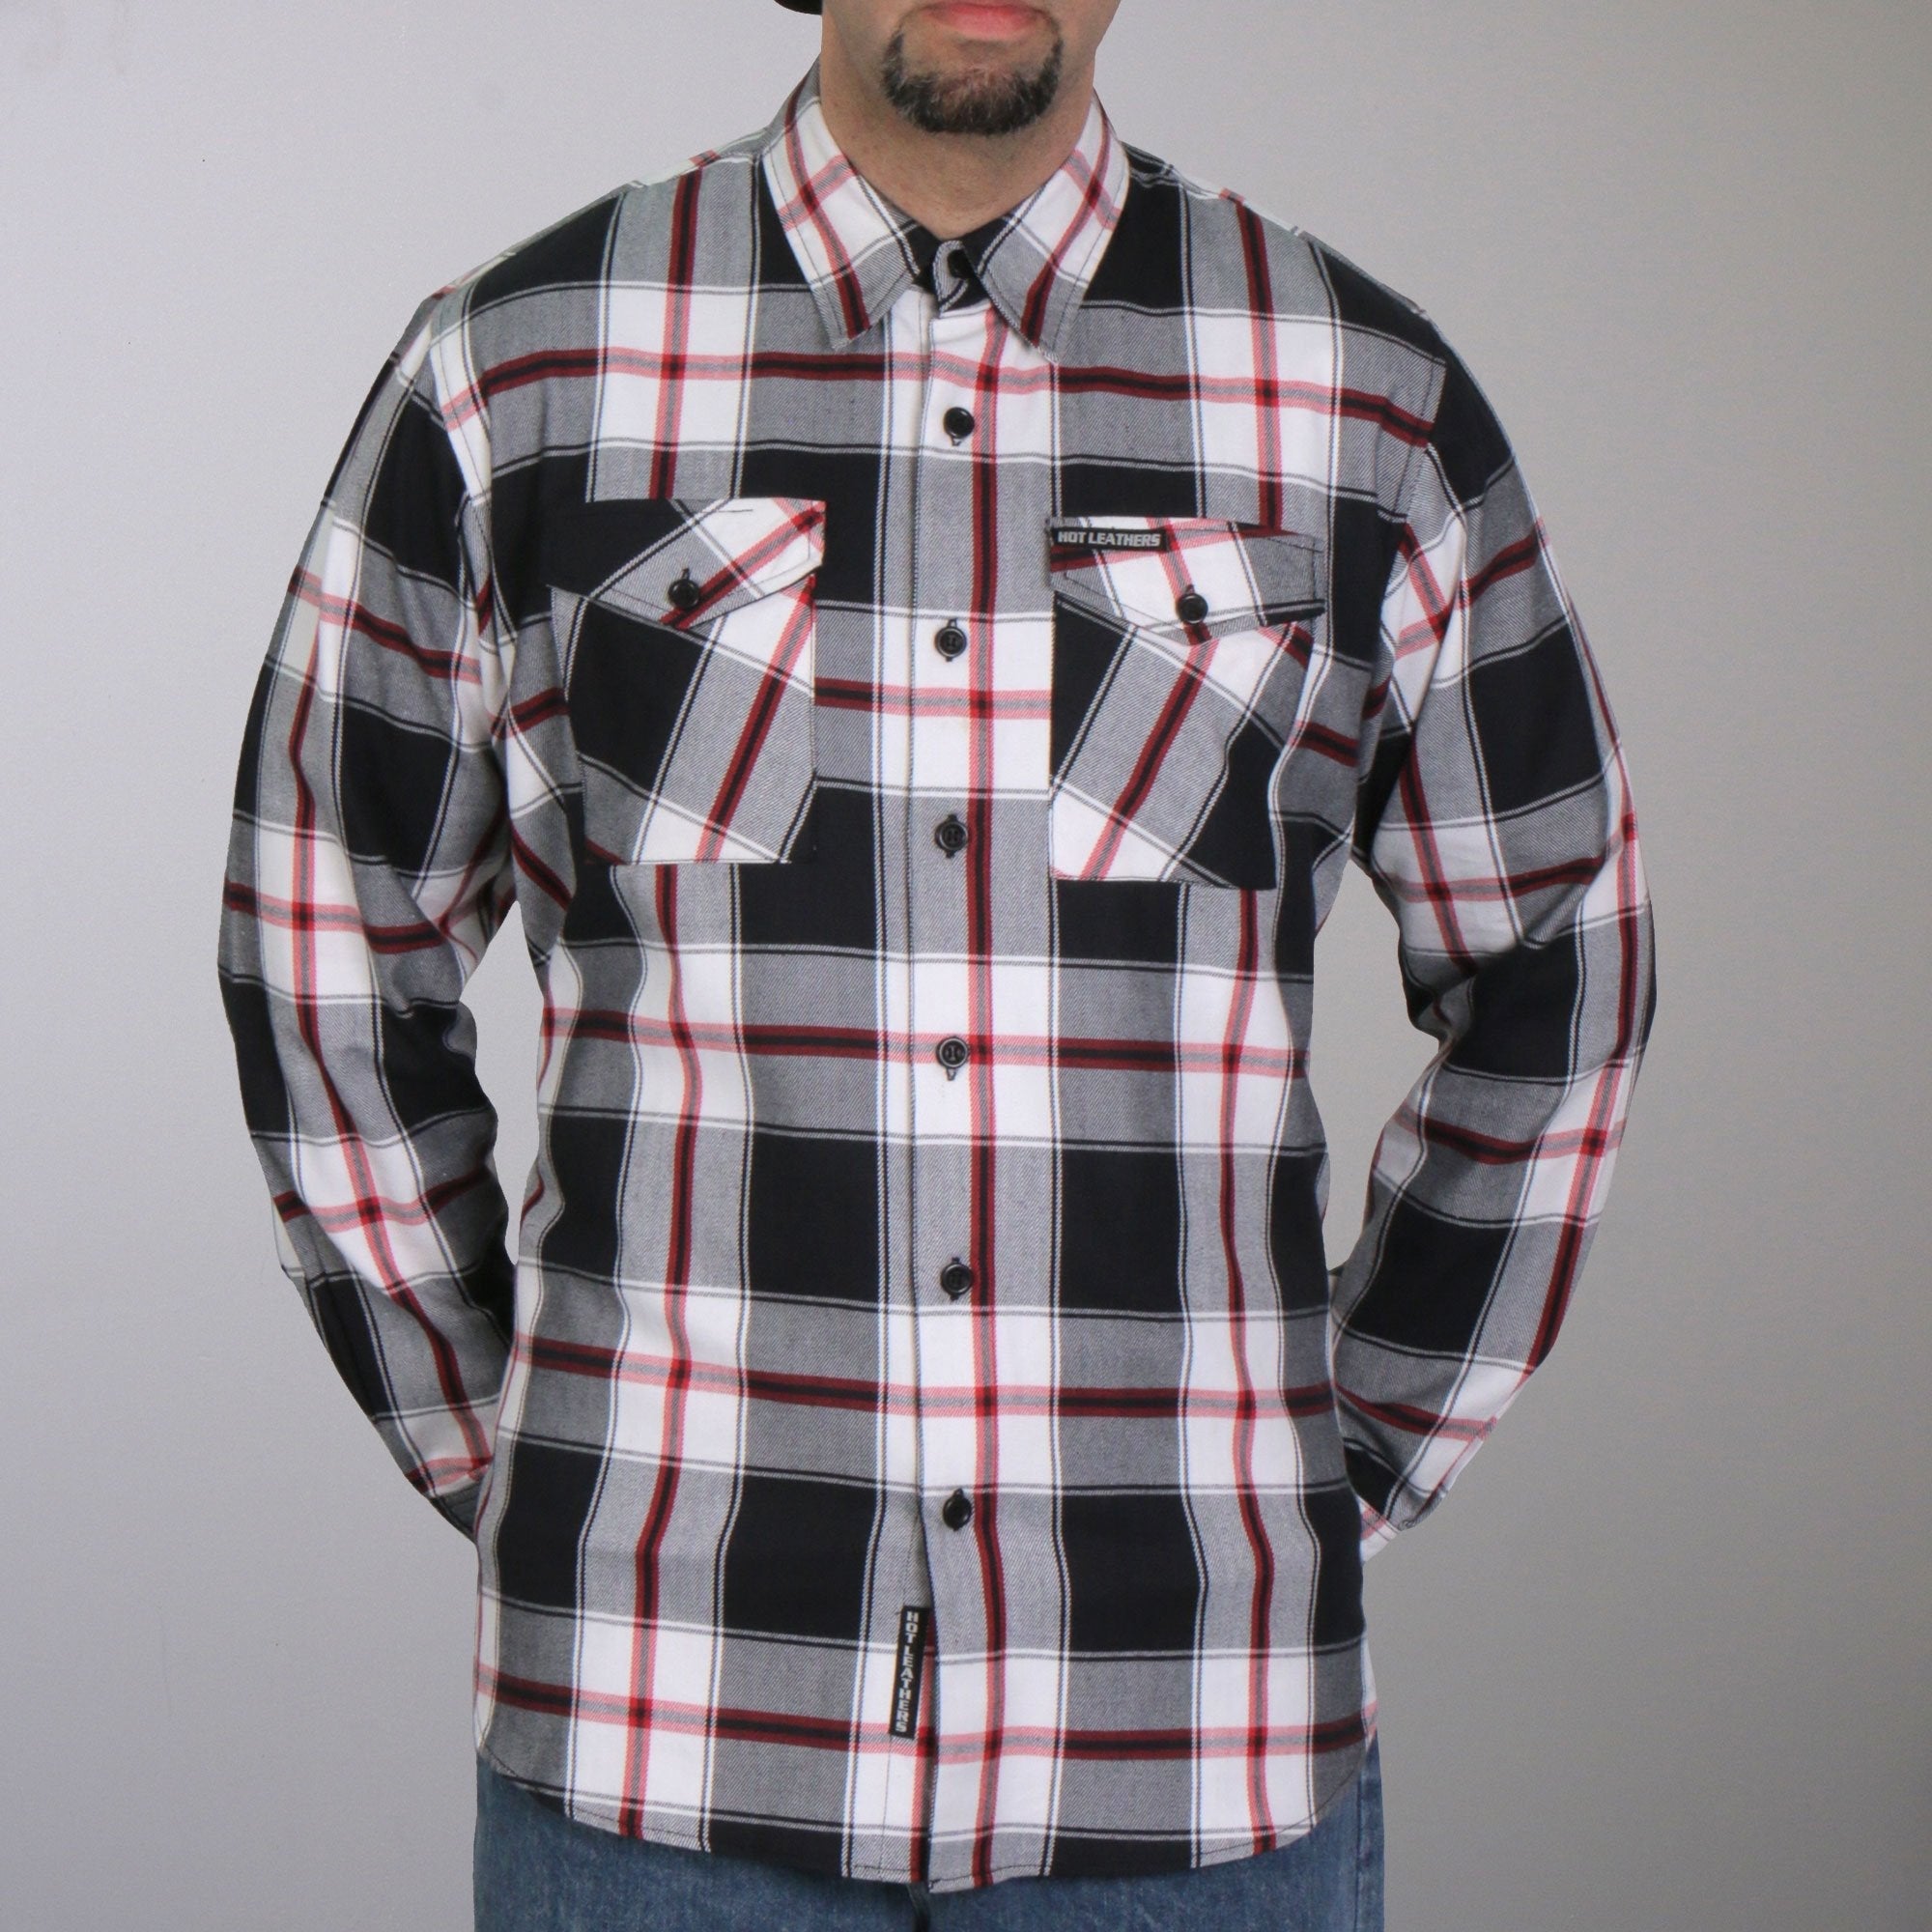 Hot Leathers FLM2003 Mens Black White and Red Long Sleeve Flannel Shirt